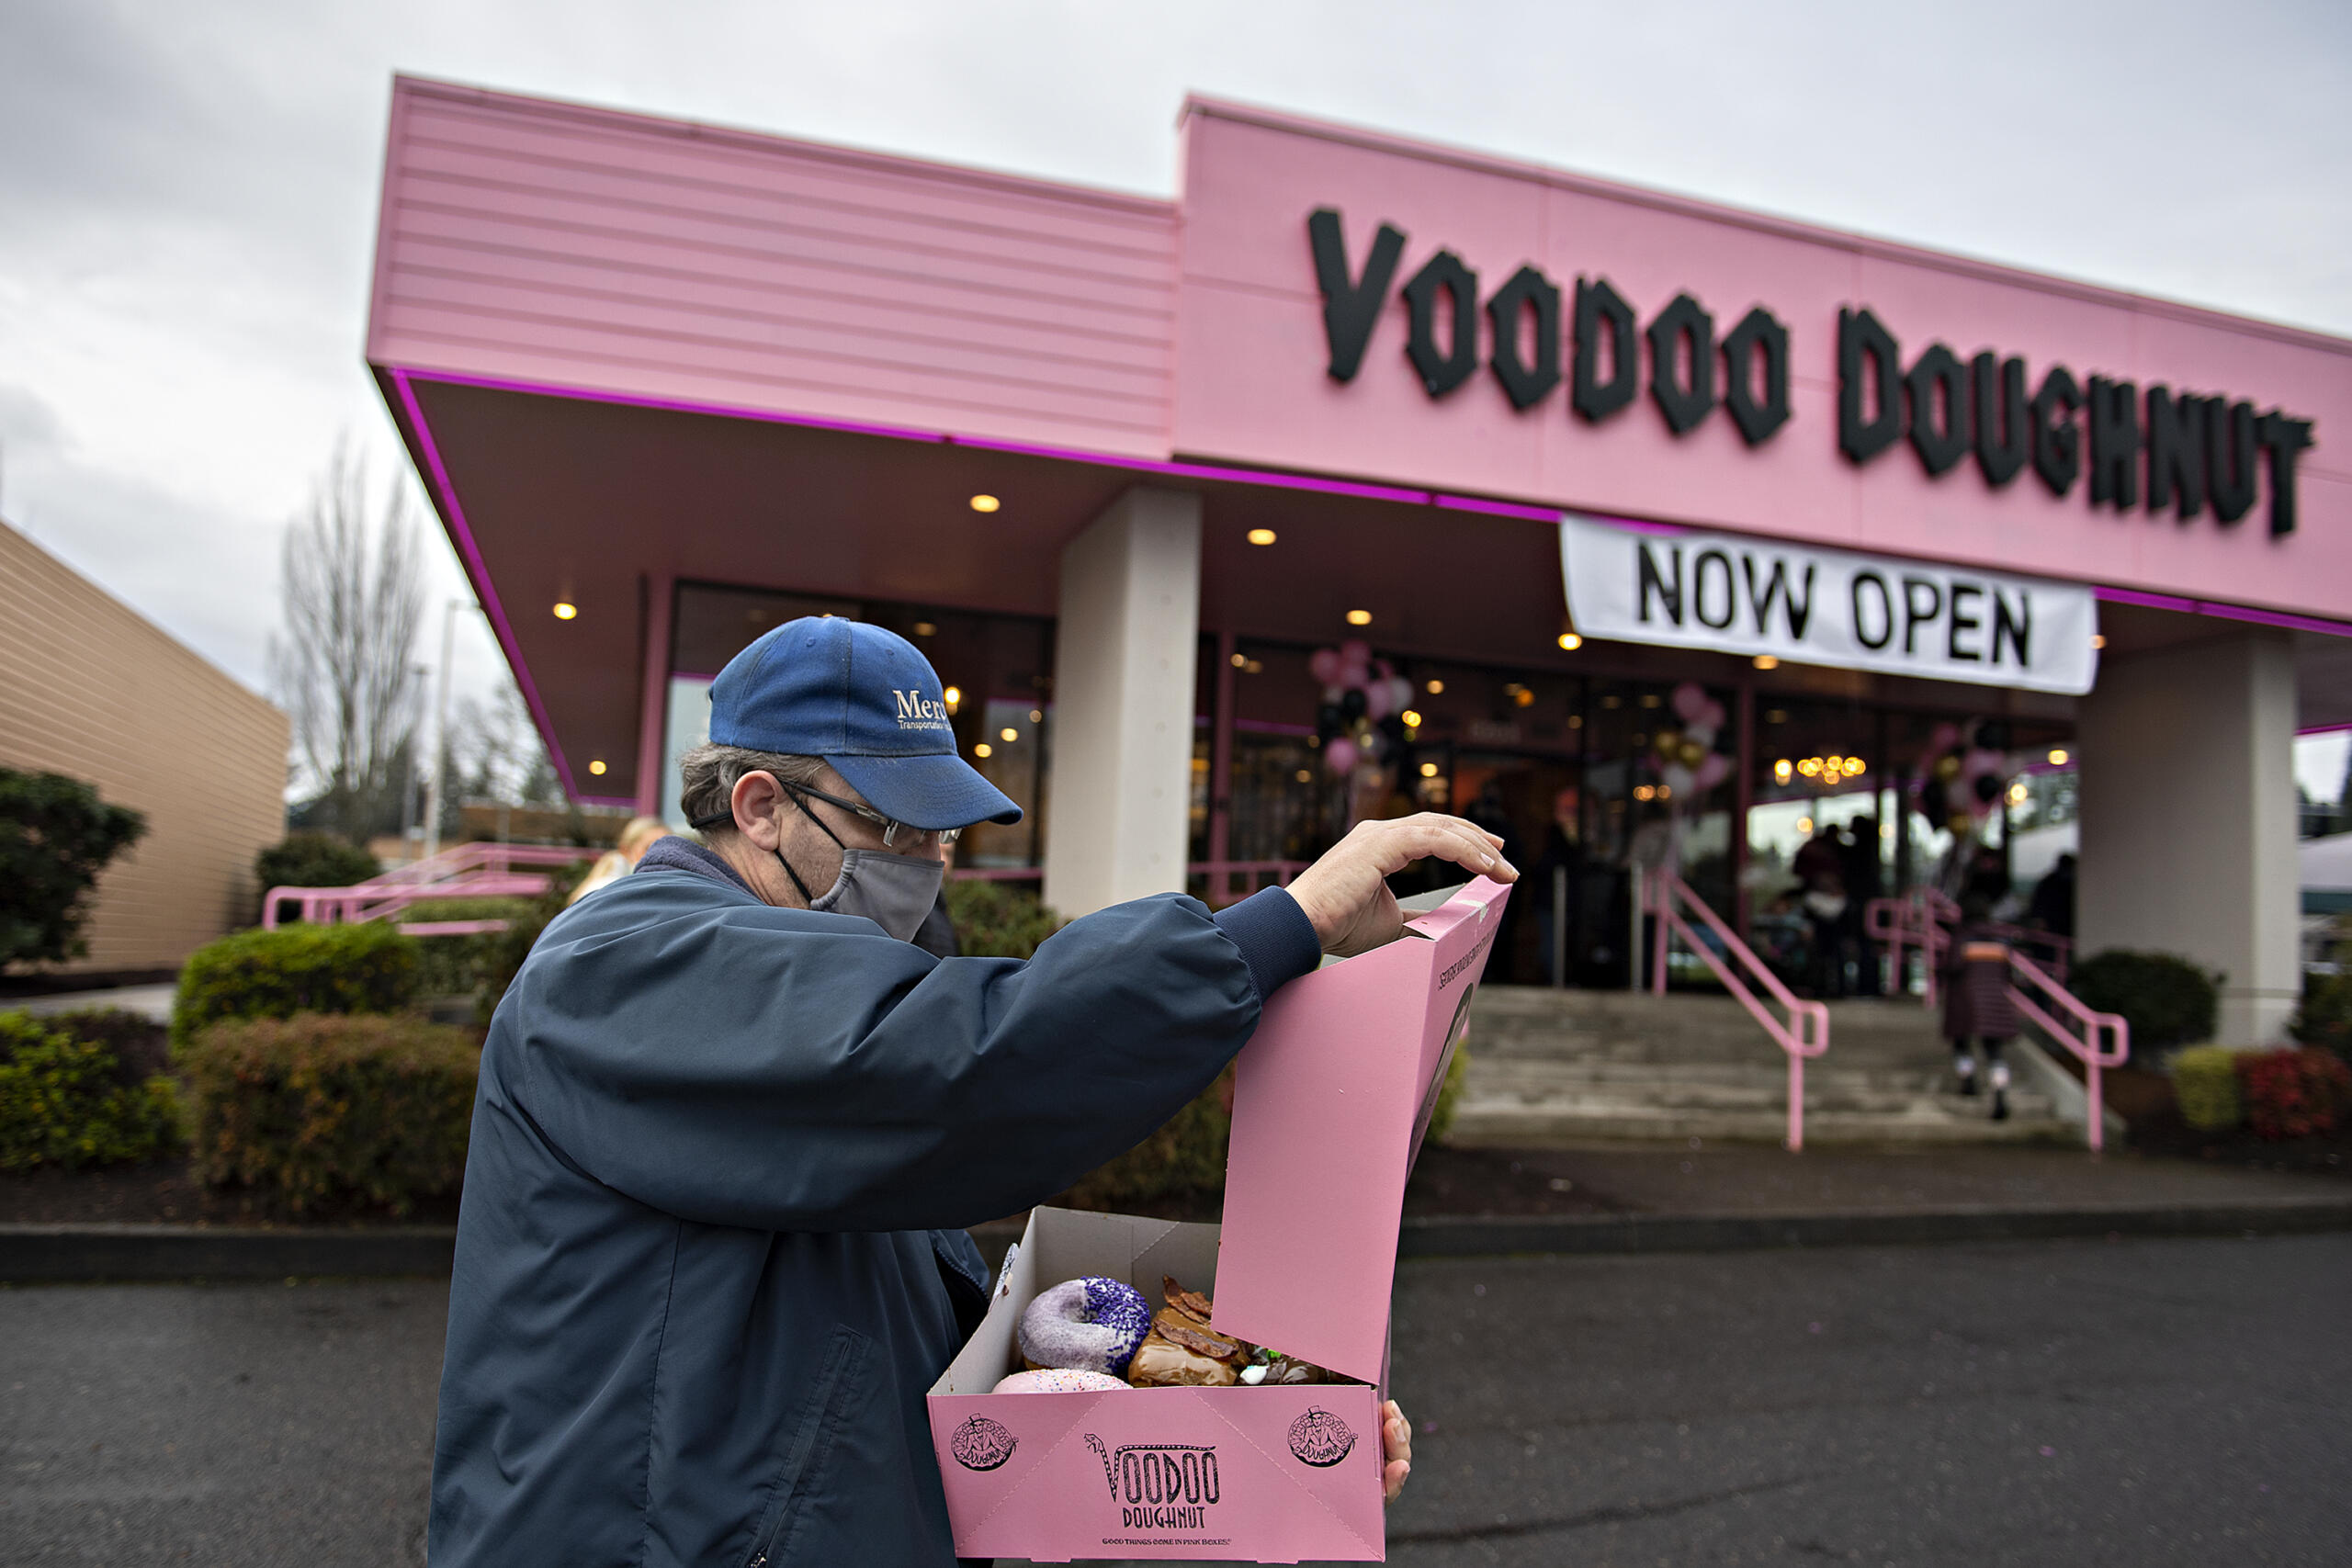 Voodoo Doughnut opens its newest shop in Vancouver - The Columbian